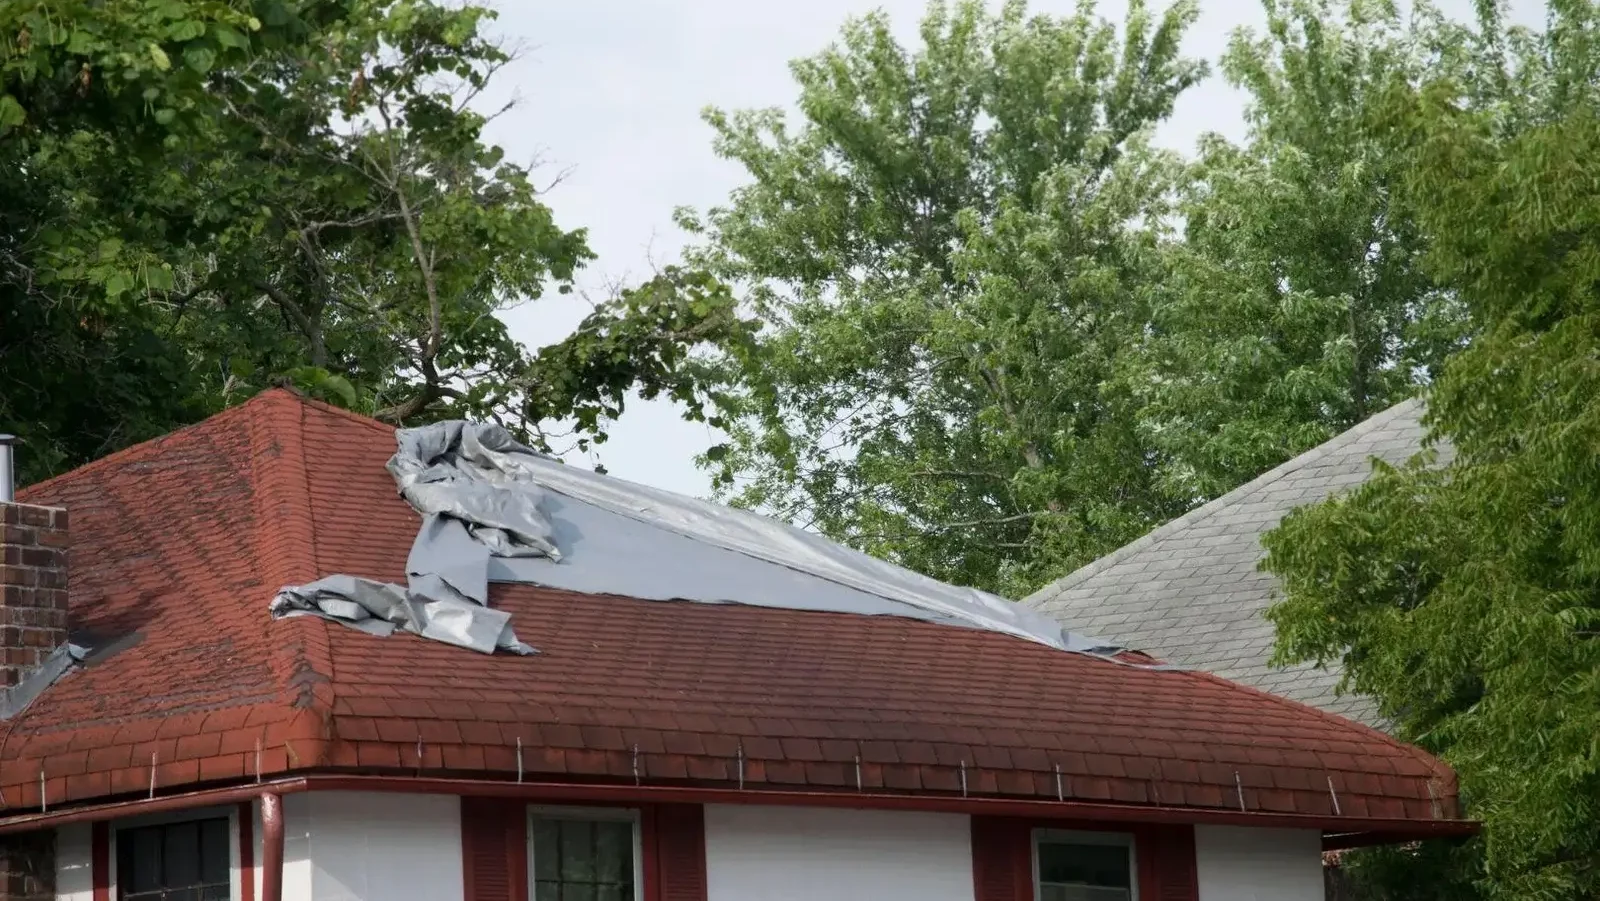 What To Do If Insurance Denied Roof Claim?